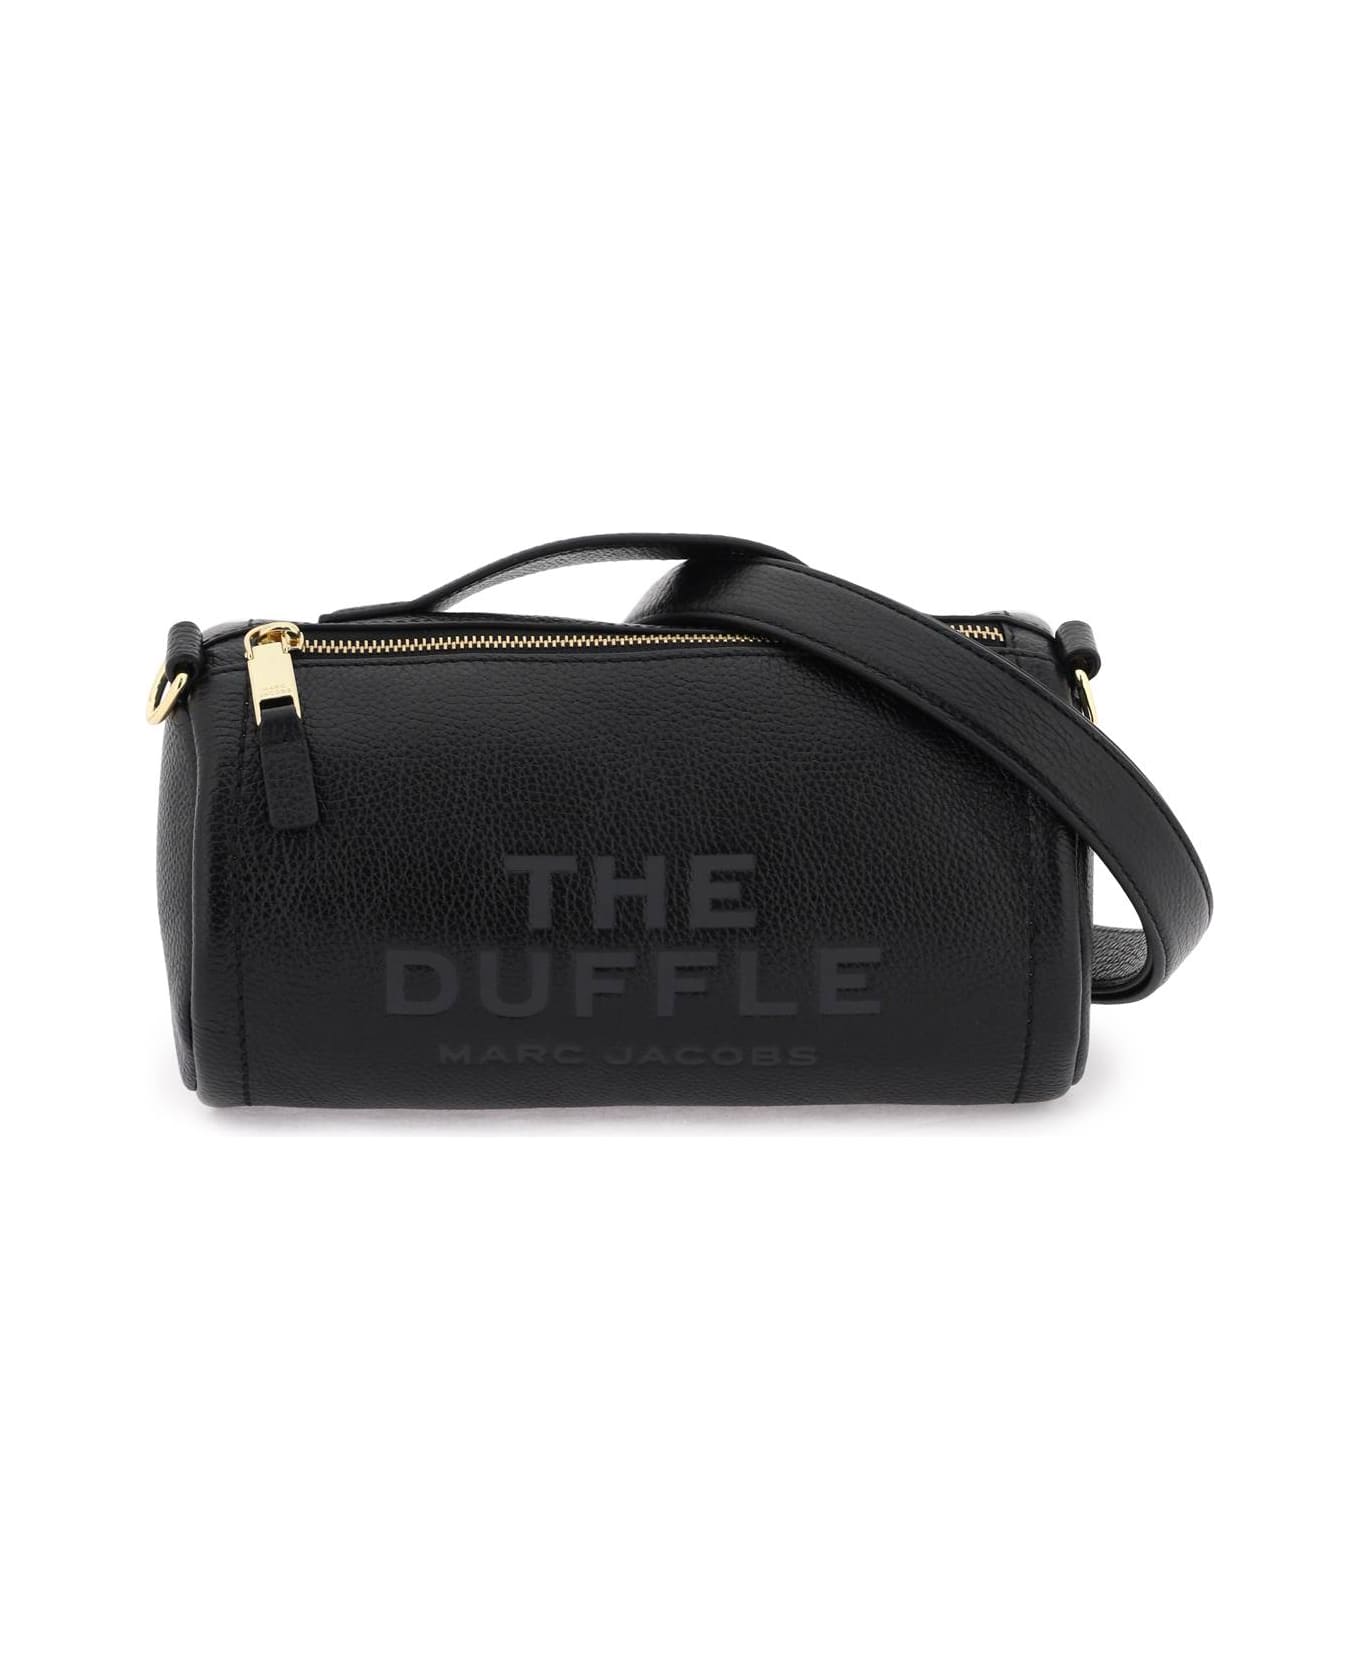 Marc Jacobs The Leather Duffle Bag - BLACK (Black) トートバッグ